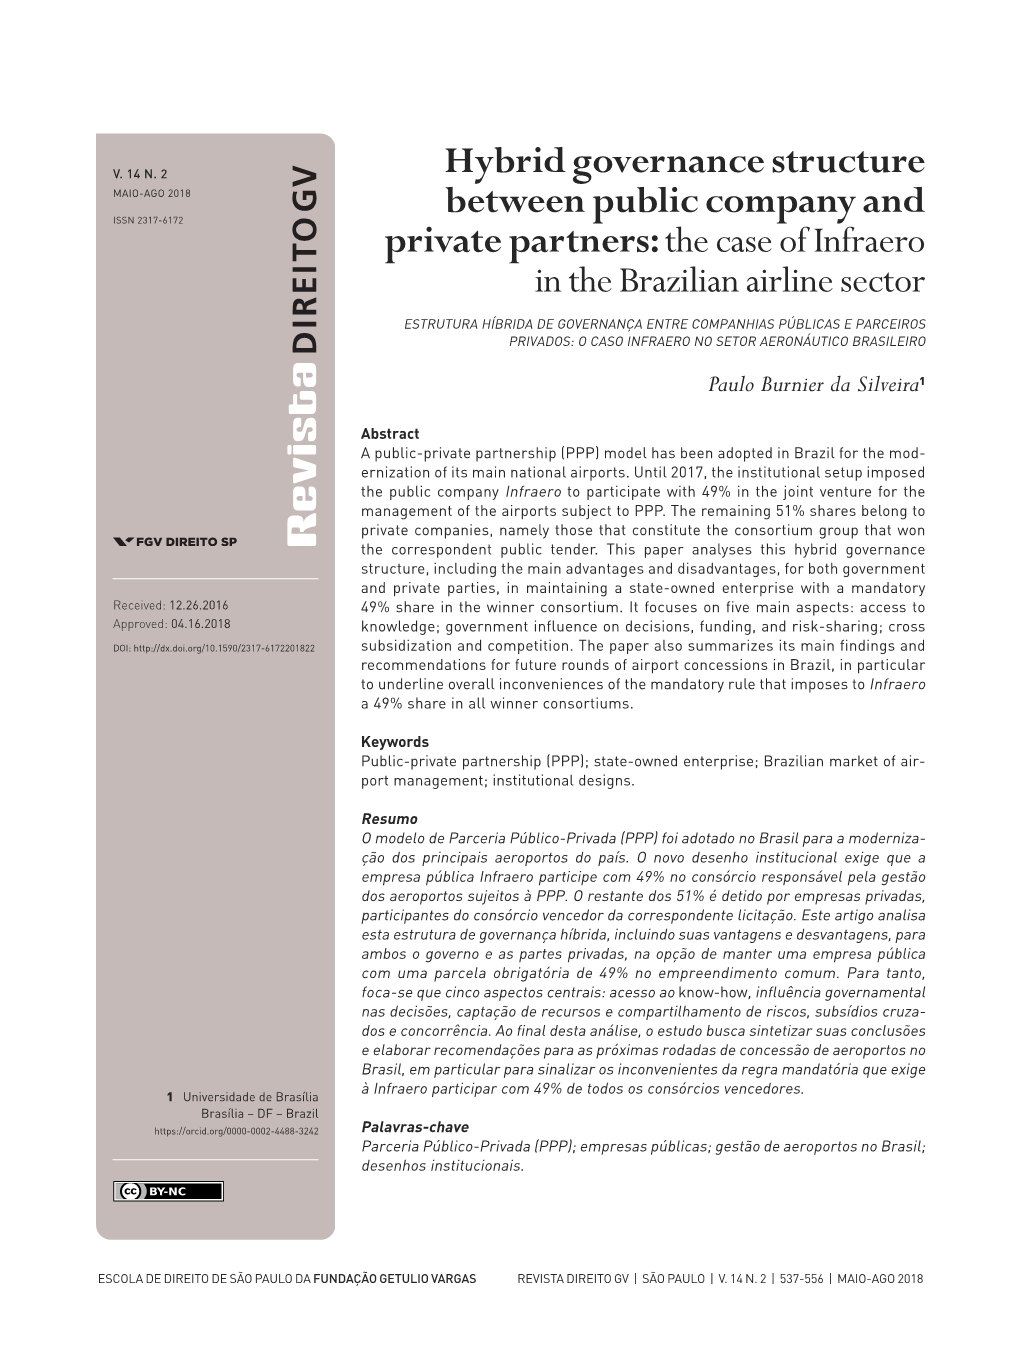 Hybrid Governance Structure Between Public Company and Private Partners: the Case of Infraero : 538